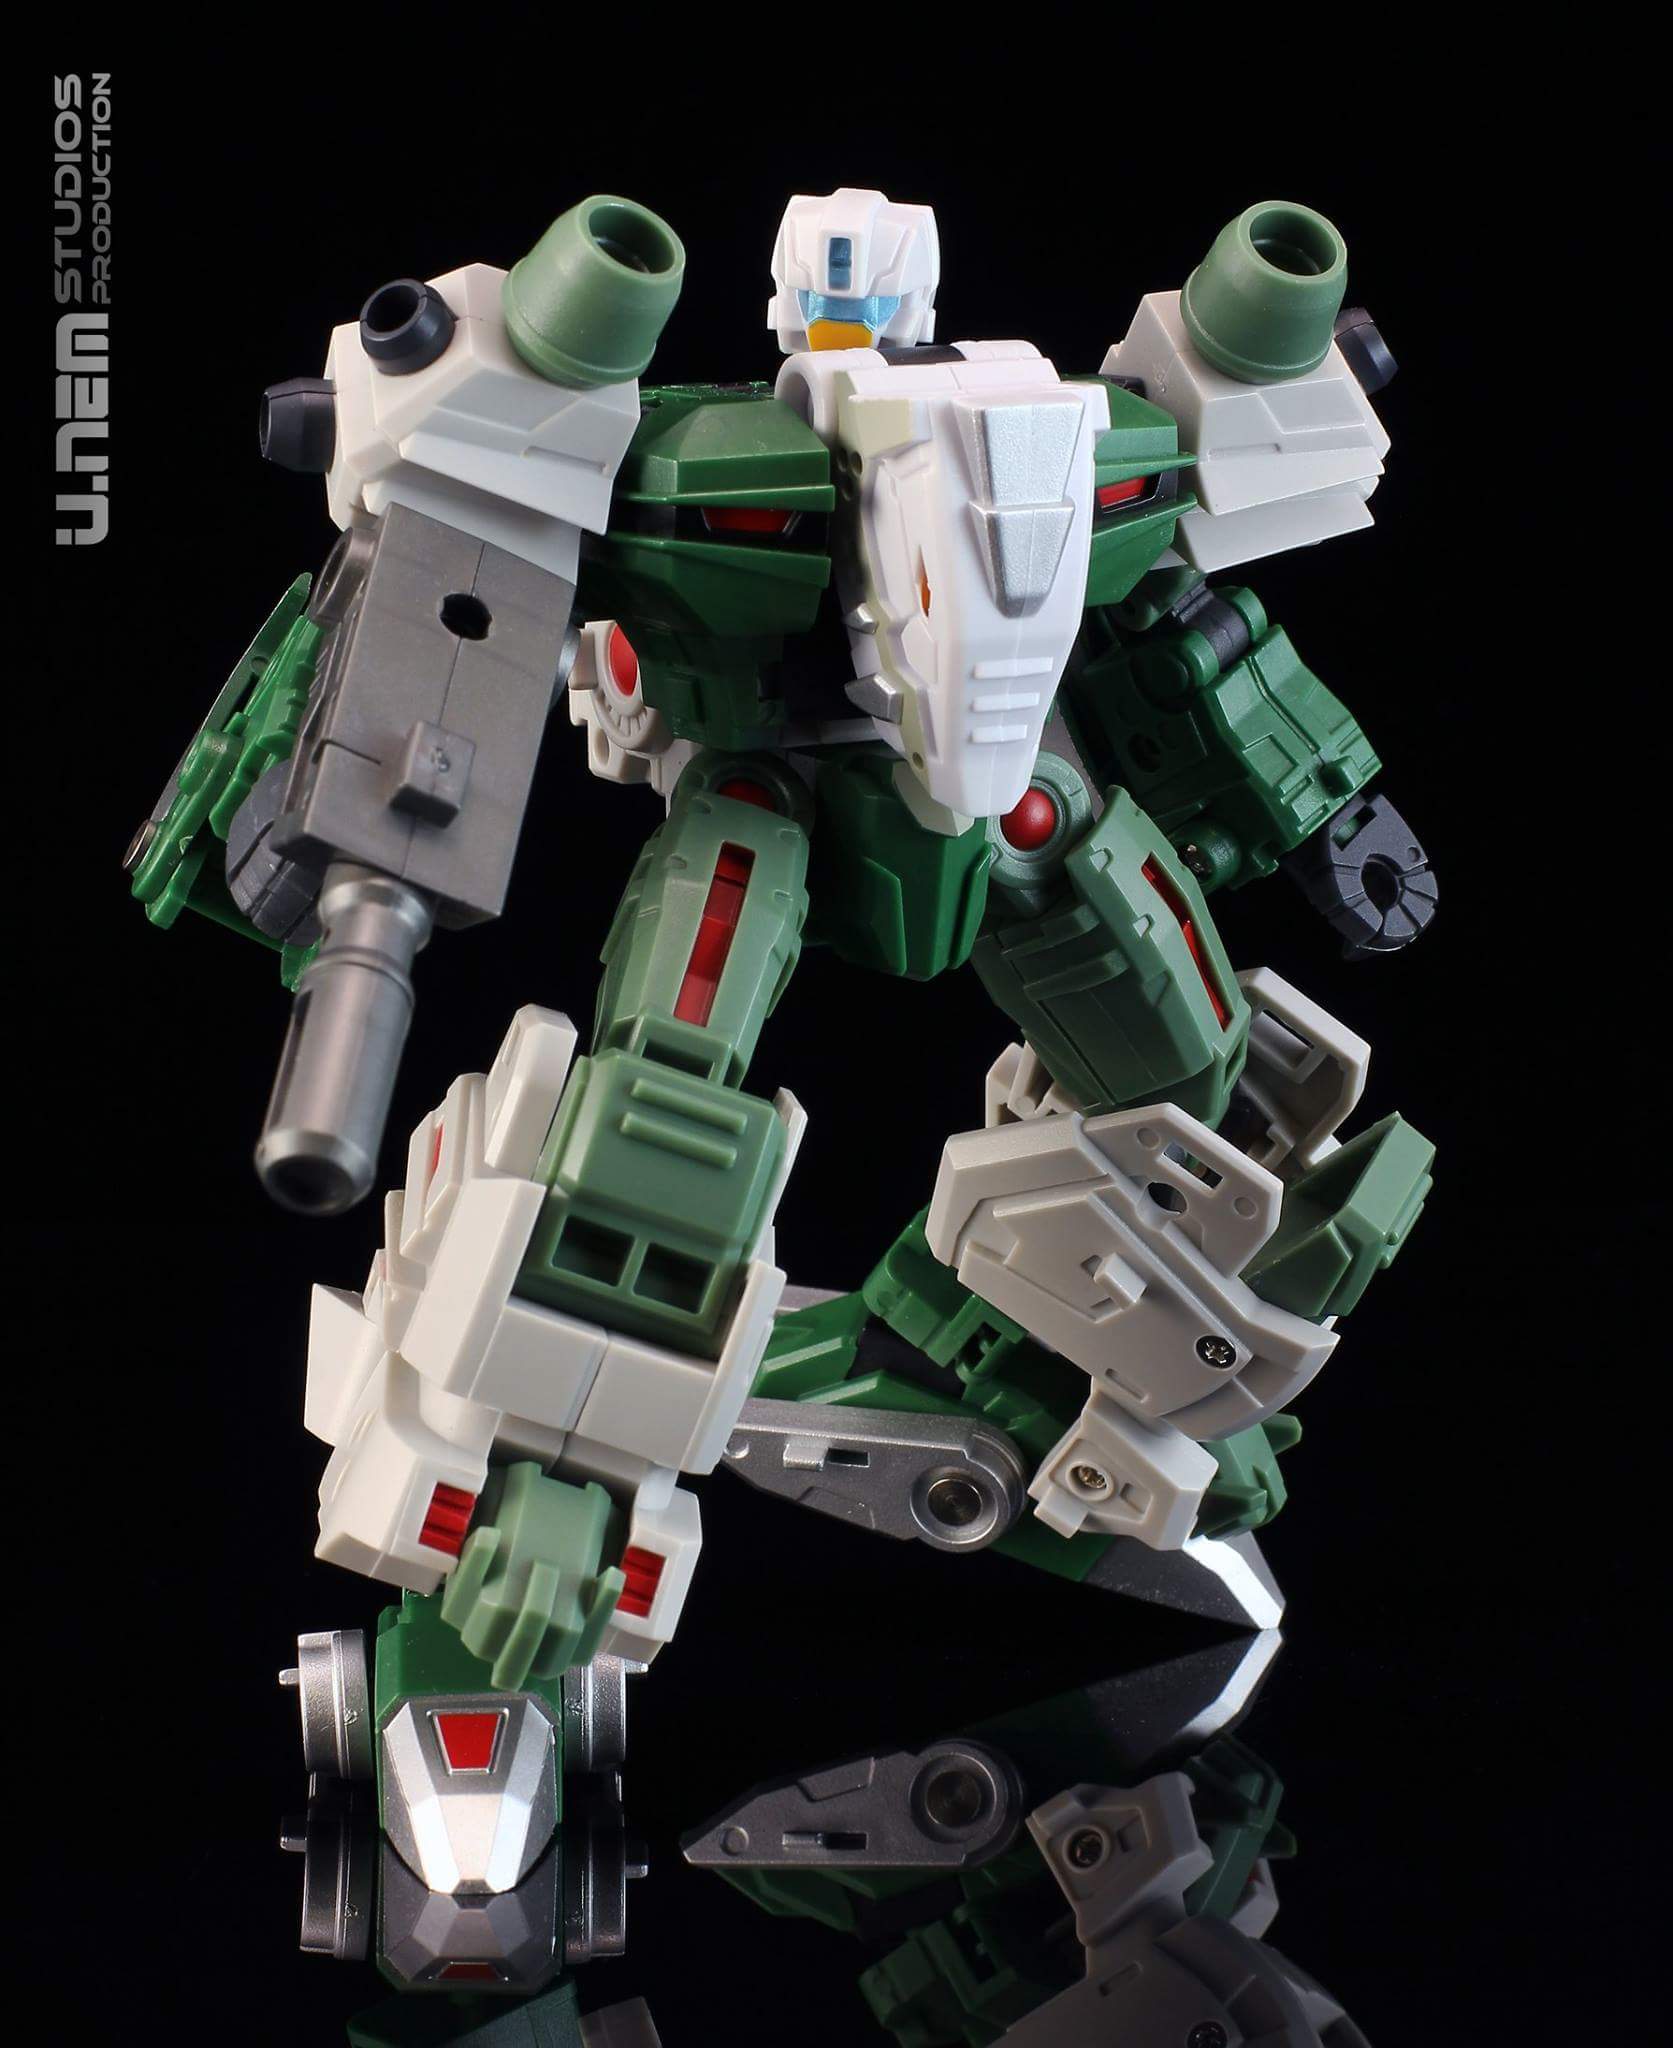 [FansProject] Produit Tiers - Ryu-Oh aka Dinoking (Victory) | Beastructor aka Monstructor (USA) - Page 3 C5D4smTo